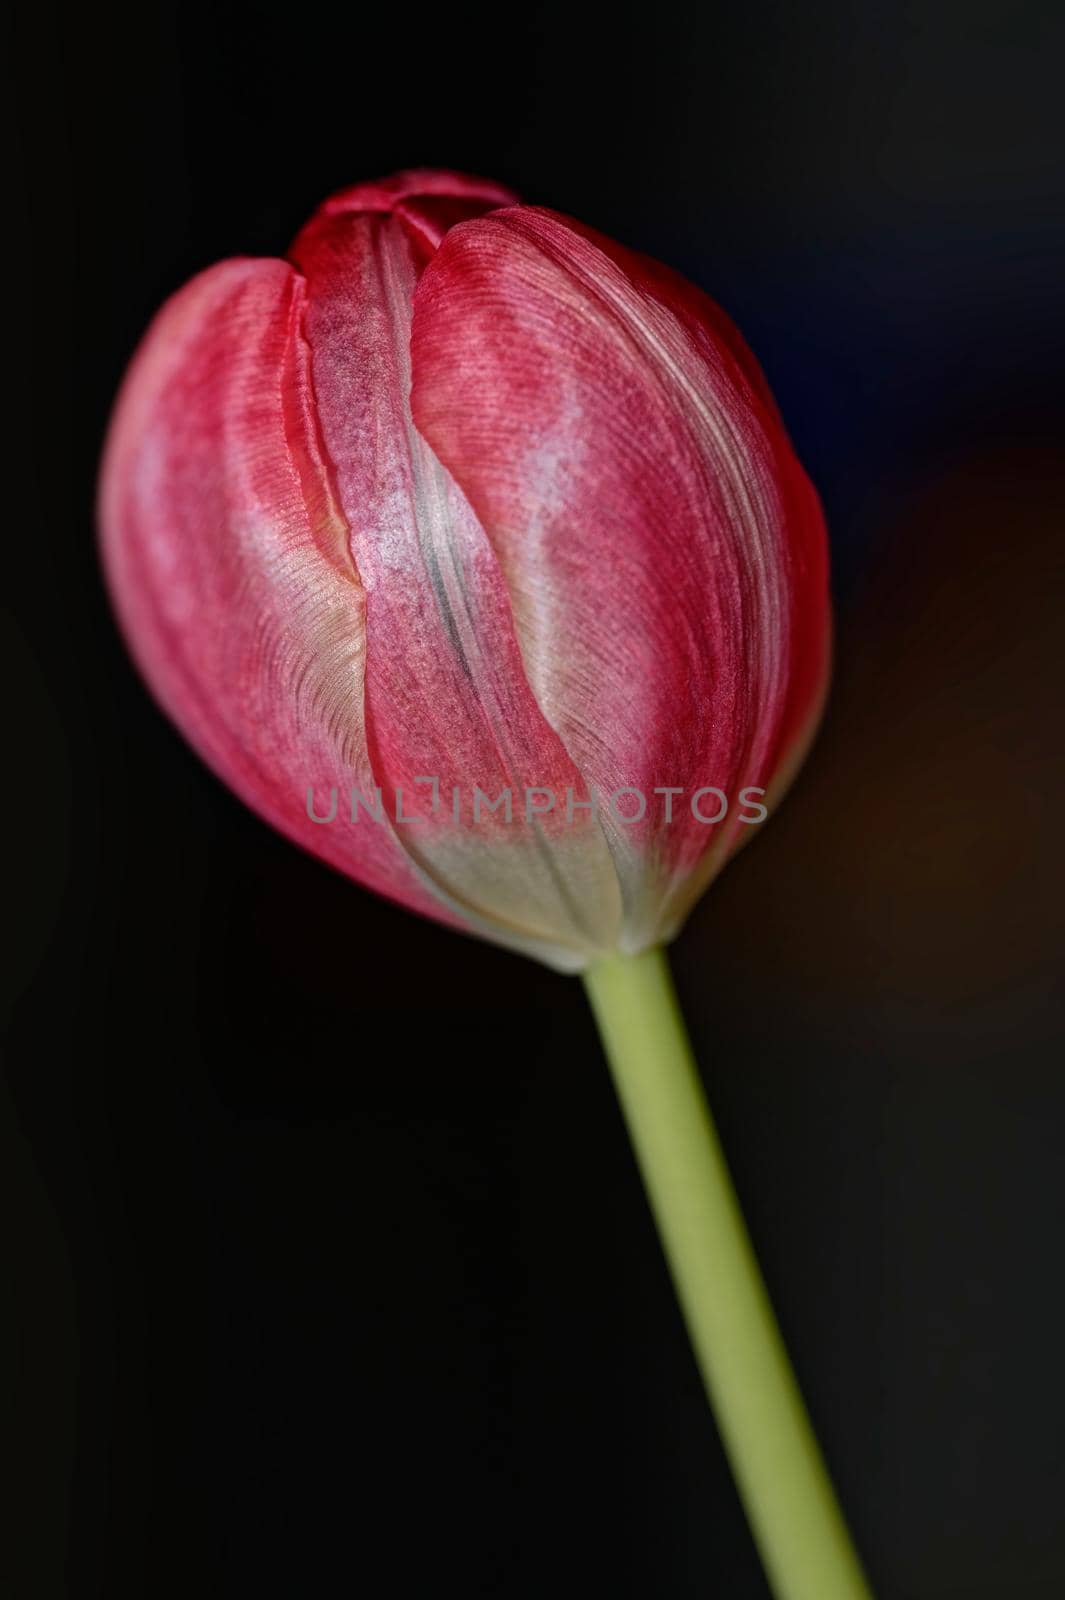 A single red tulip with closed flower against a dark background in vertical orientation.